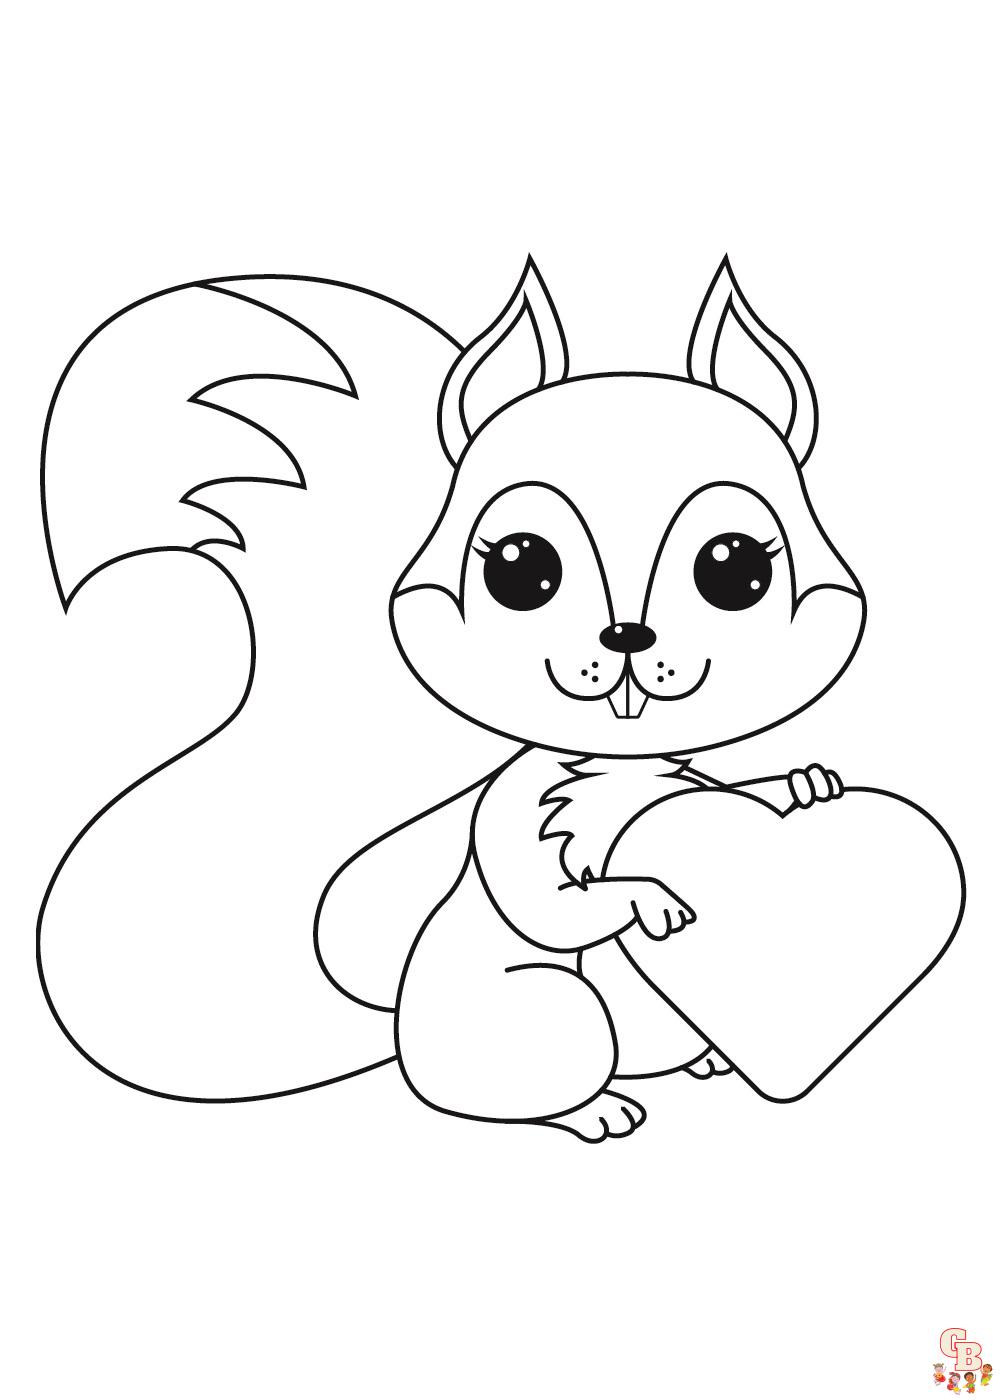 Squirrel Coloring Pages 6